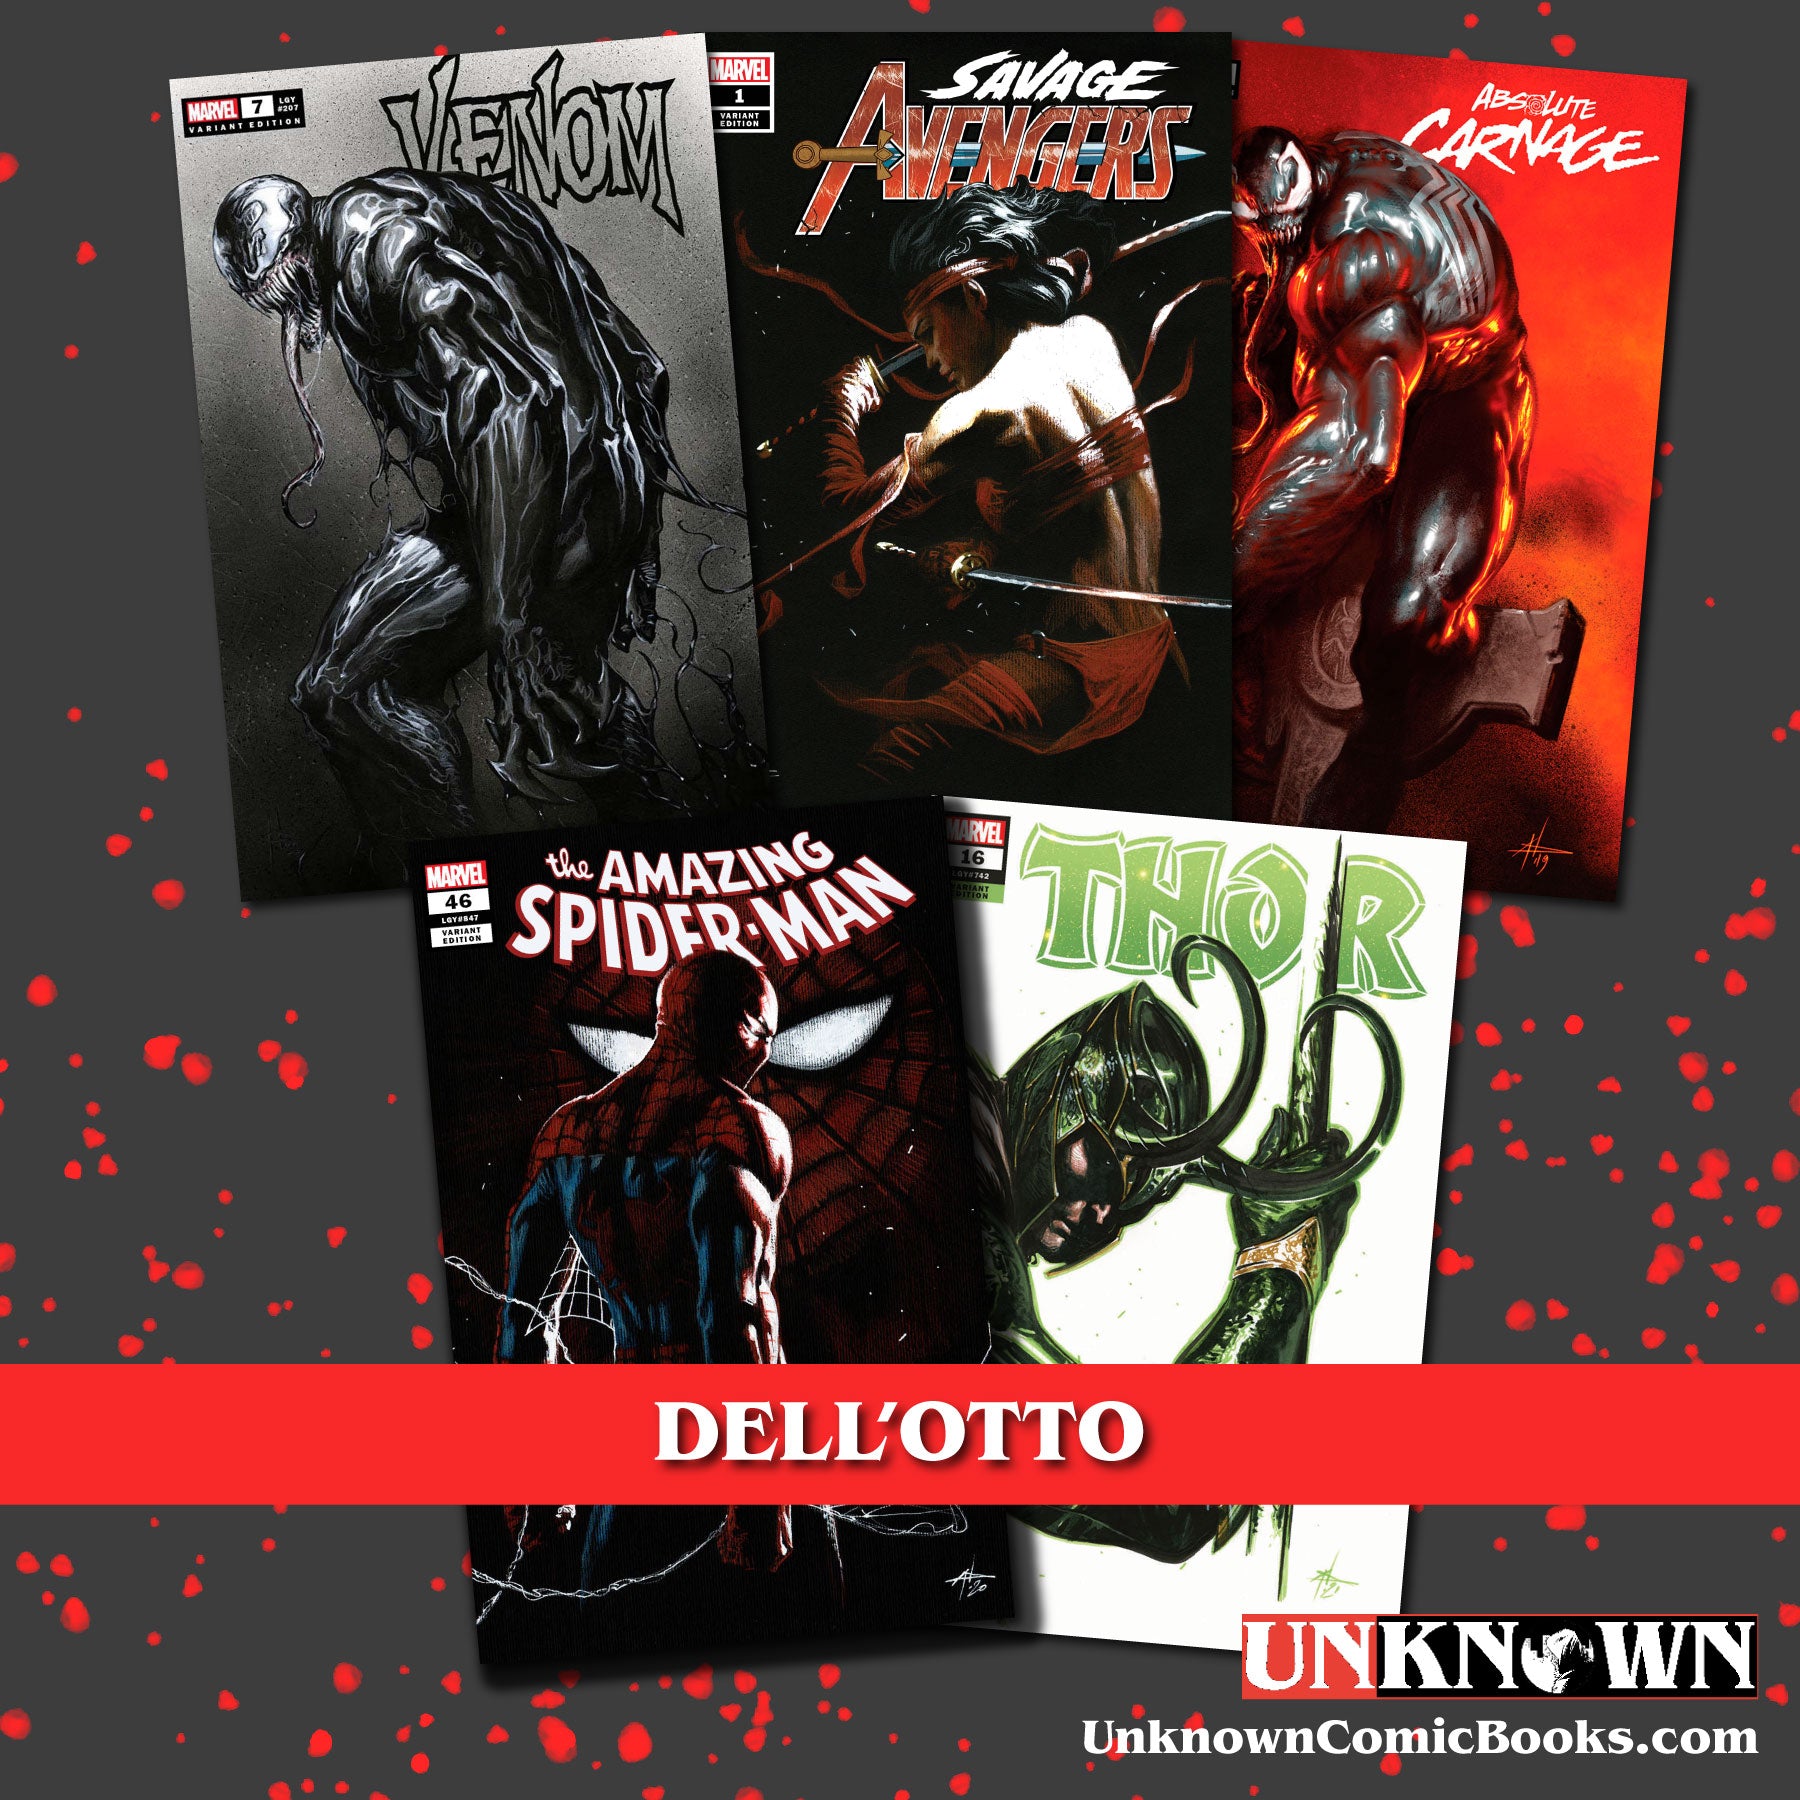 rustig aan heilig ik ben trots 5 PACK] UNKNOWN COMICS MYSTERY THEMED 👉🎨DELL'OTTO ARTIST EXCLUSIVE BO -  Unknown Comic Books - MARVEL COMICS